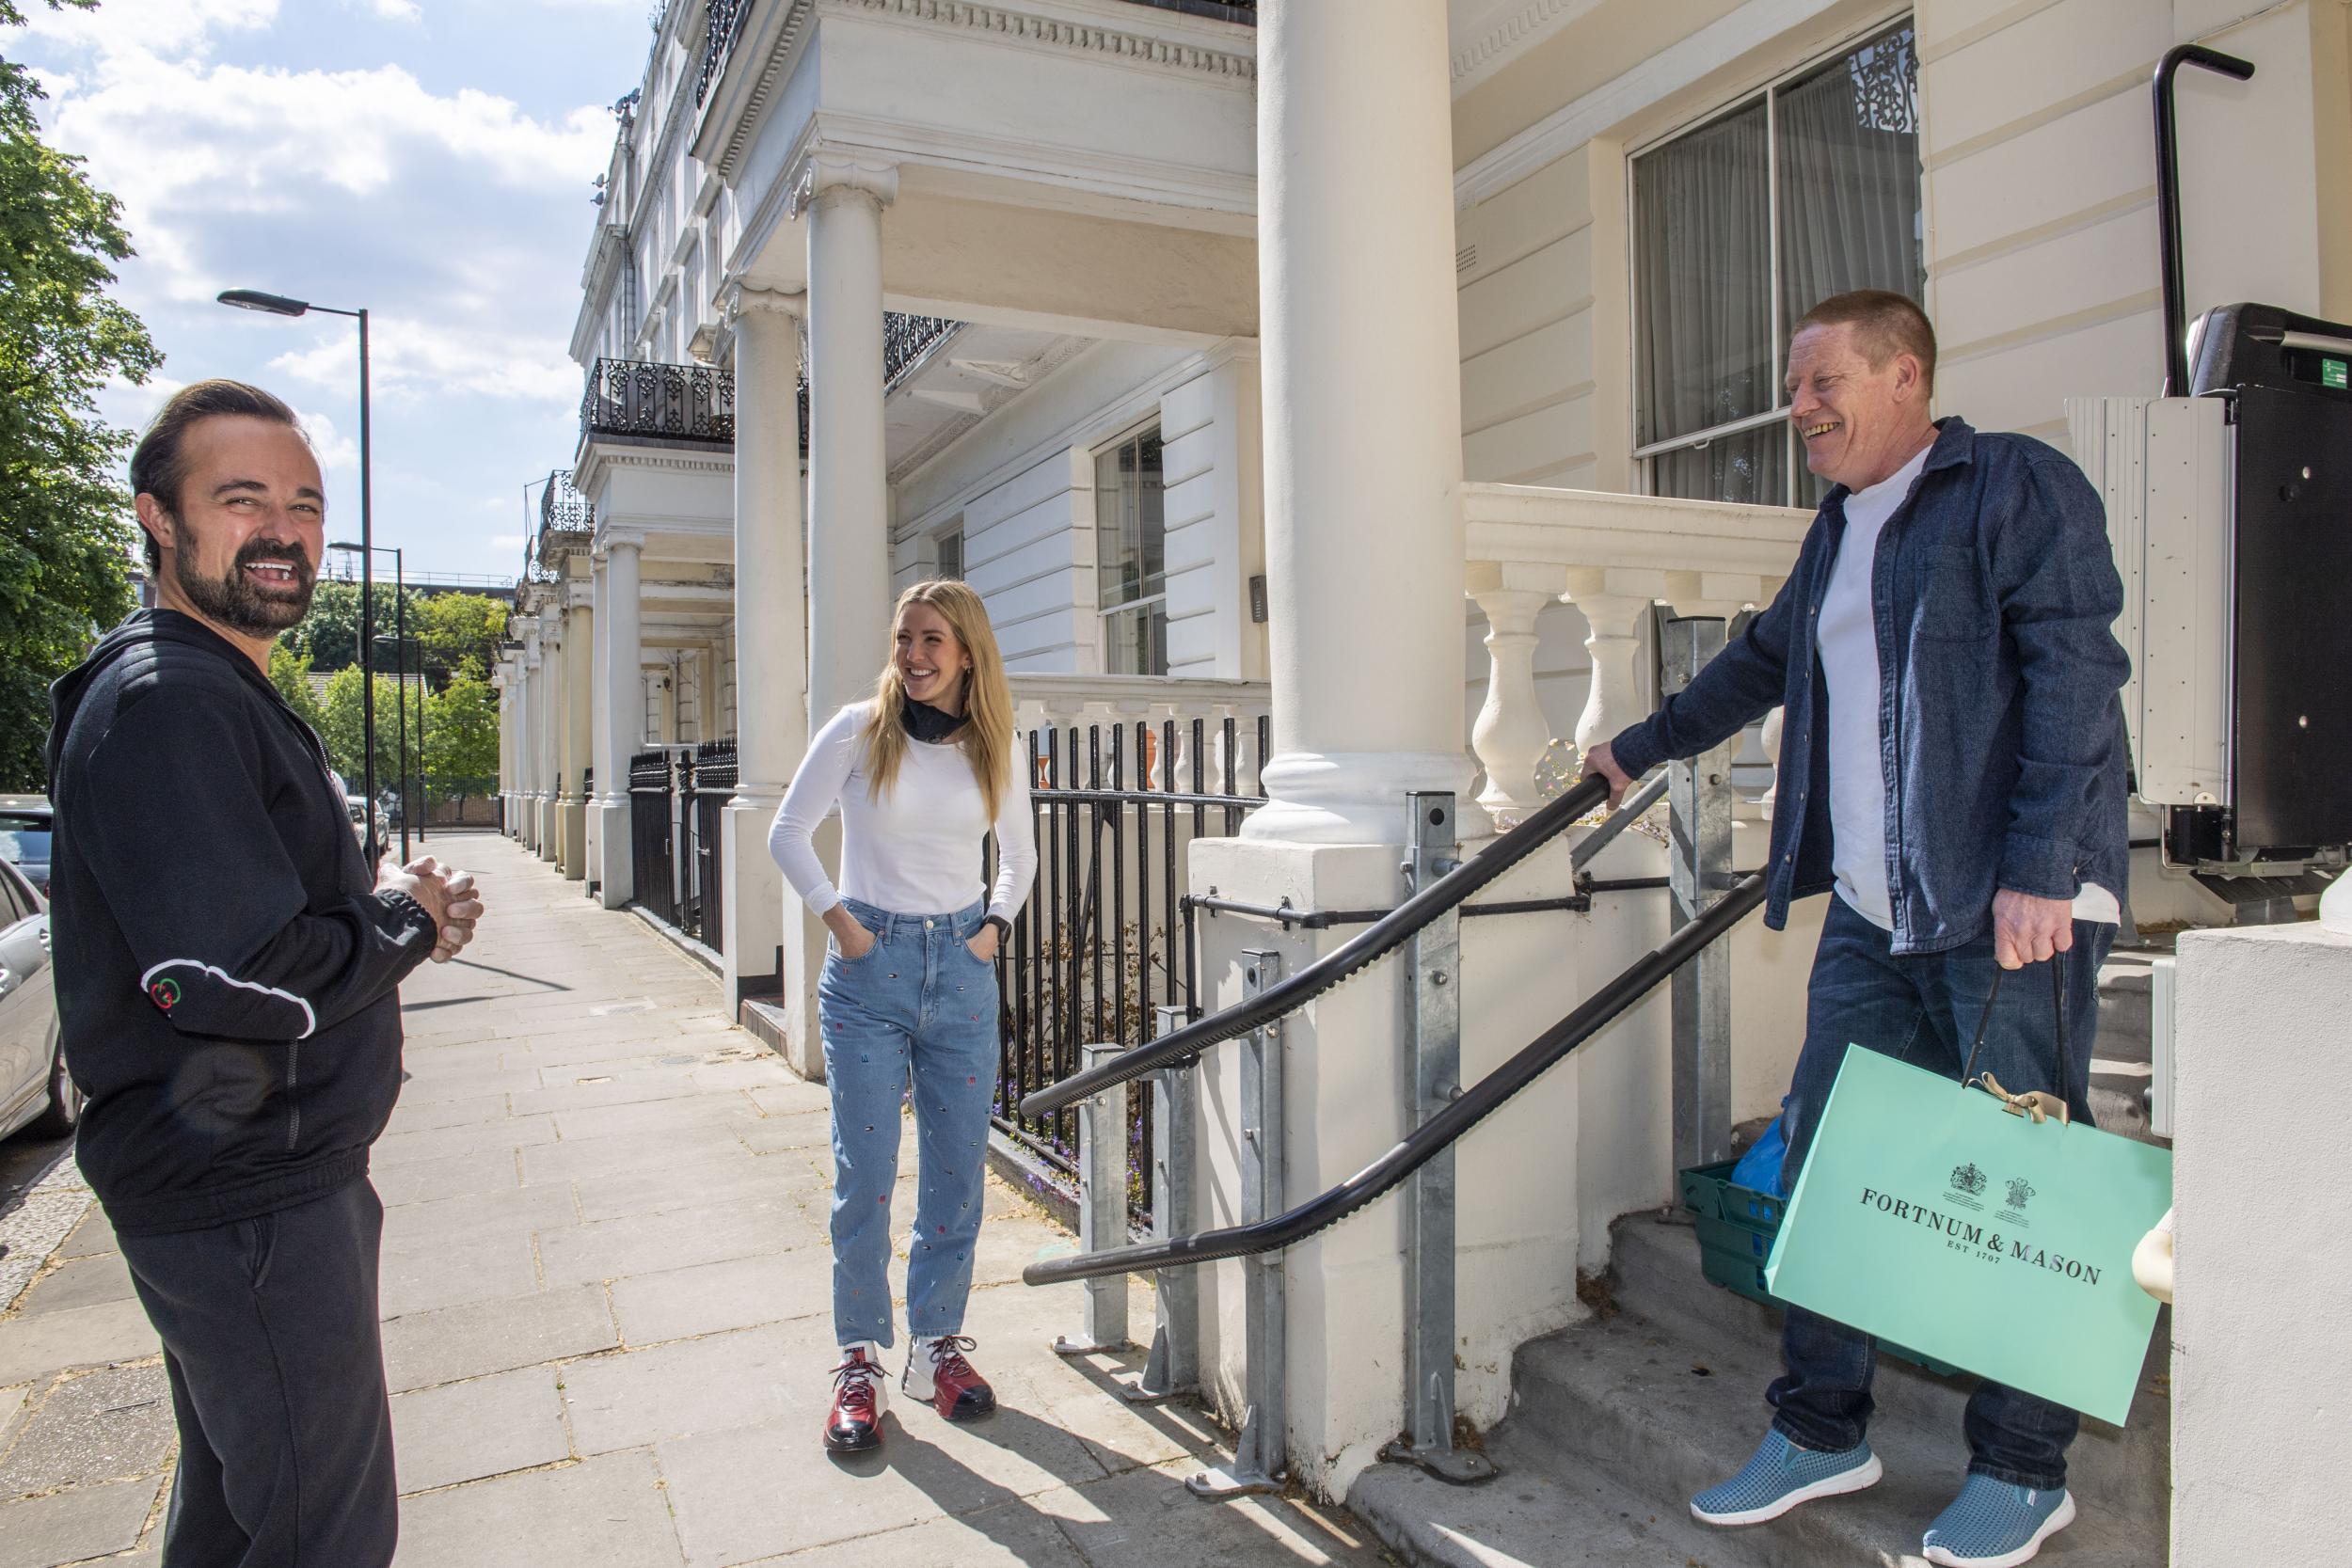 Deliveries: Ellie Goulding and Evgeny Lebedev meet Dean outside his home in Bayswater